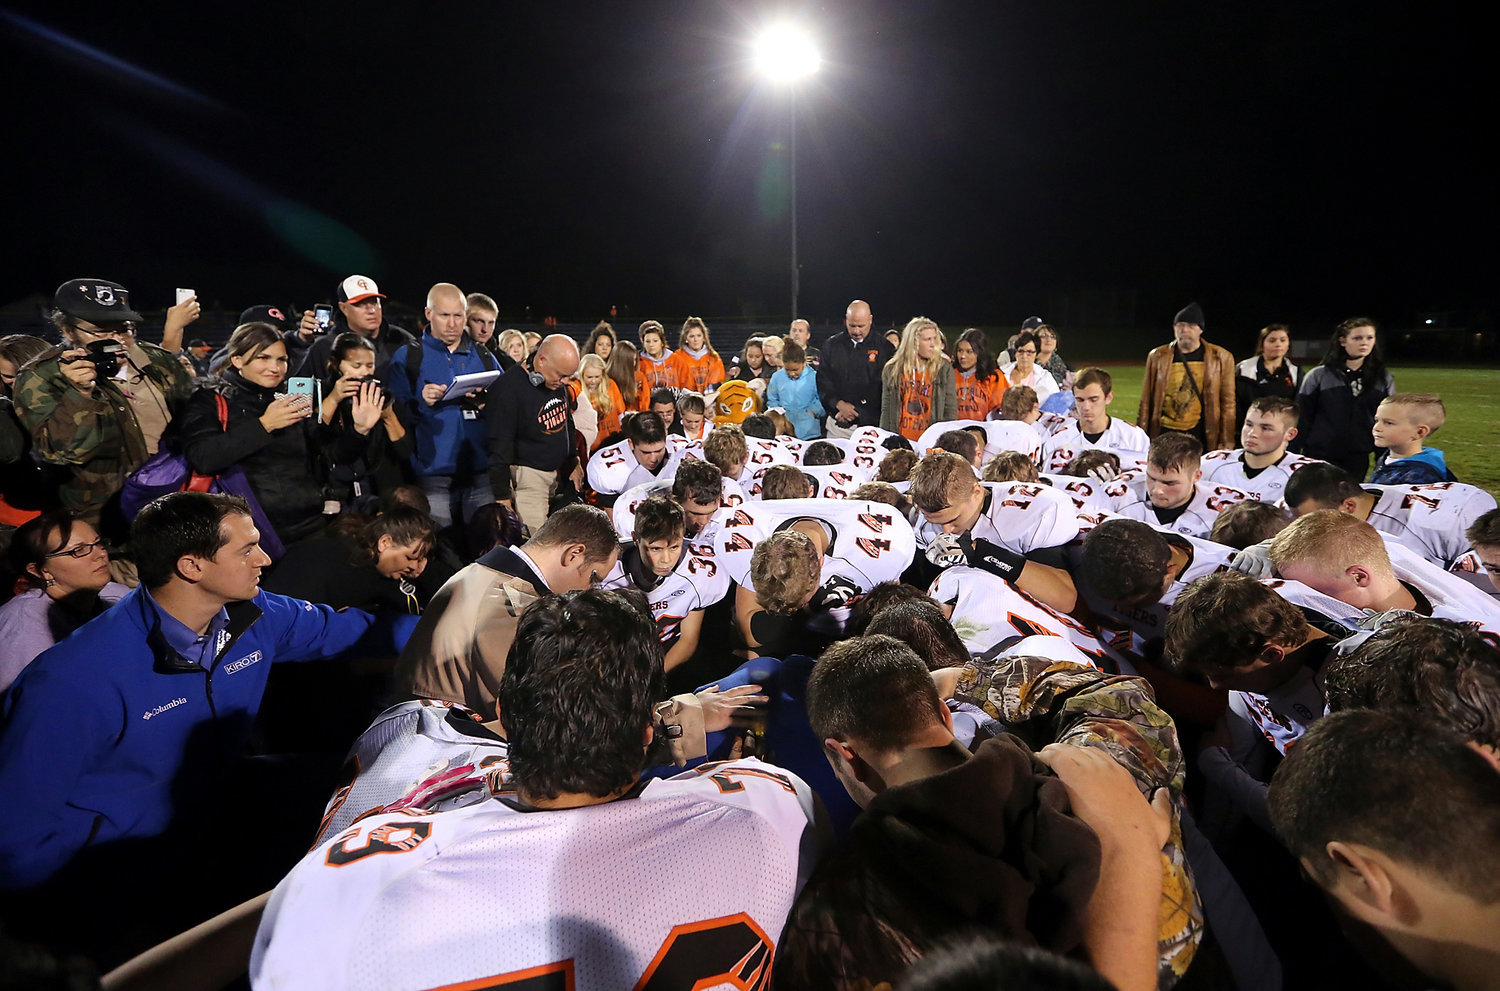 Bremerton School Board Approves Settlement With Coach Over On-Field Prayer  | The Daily Chronicle